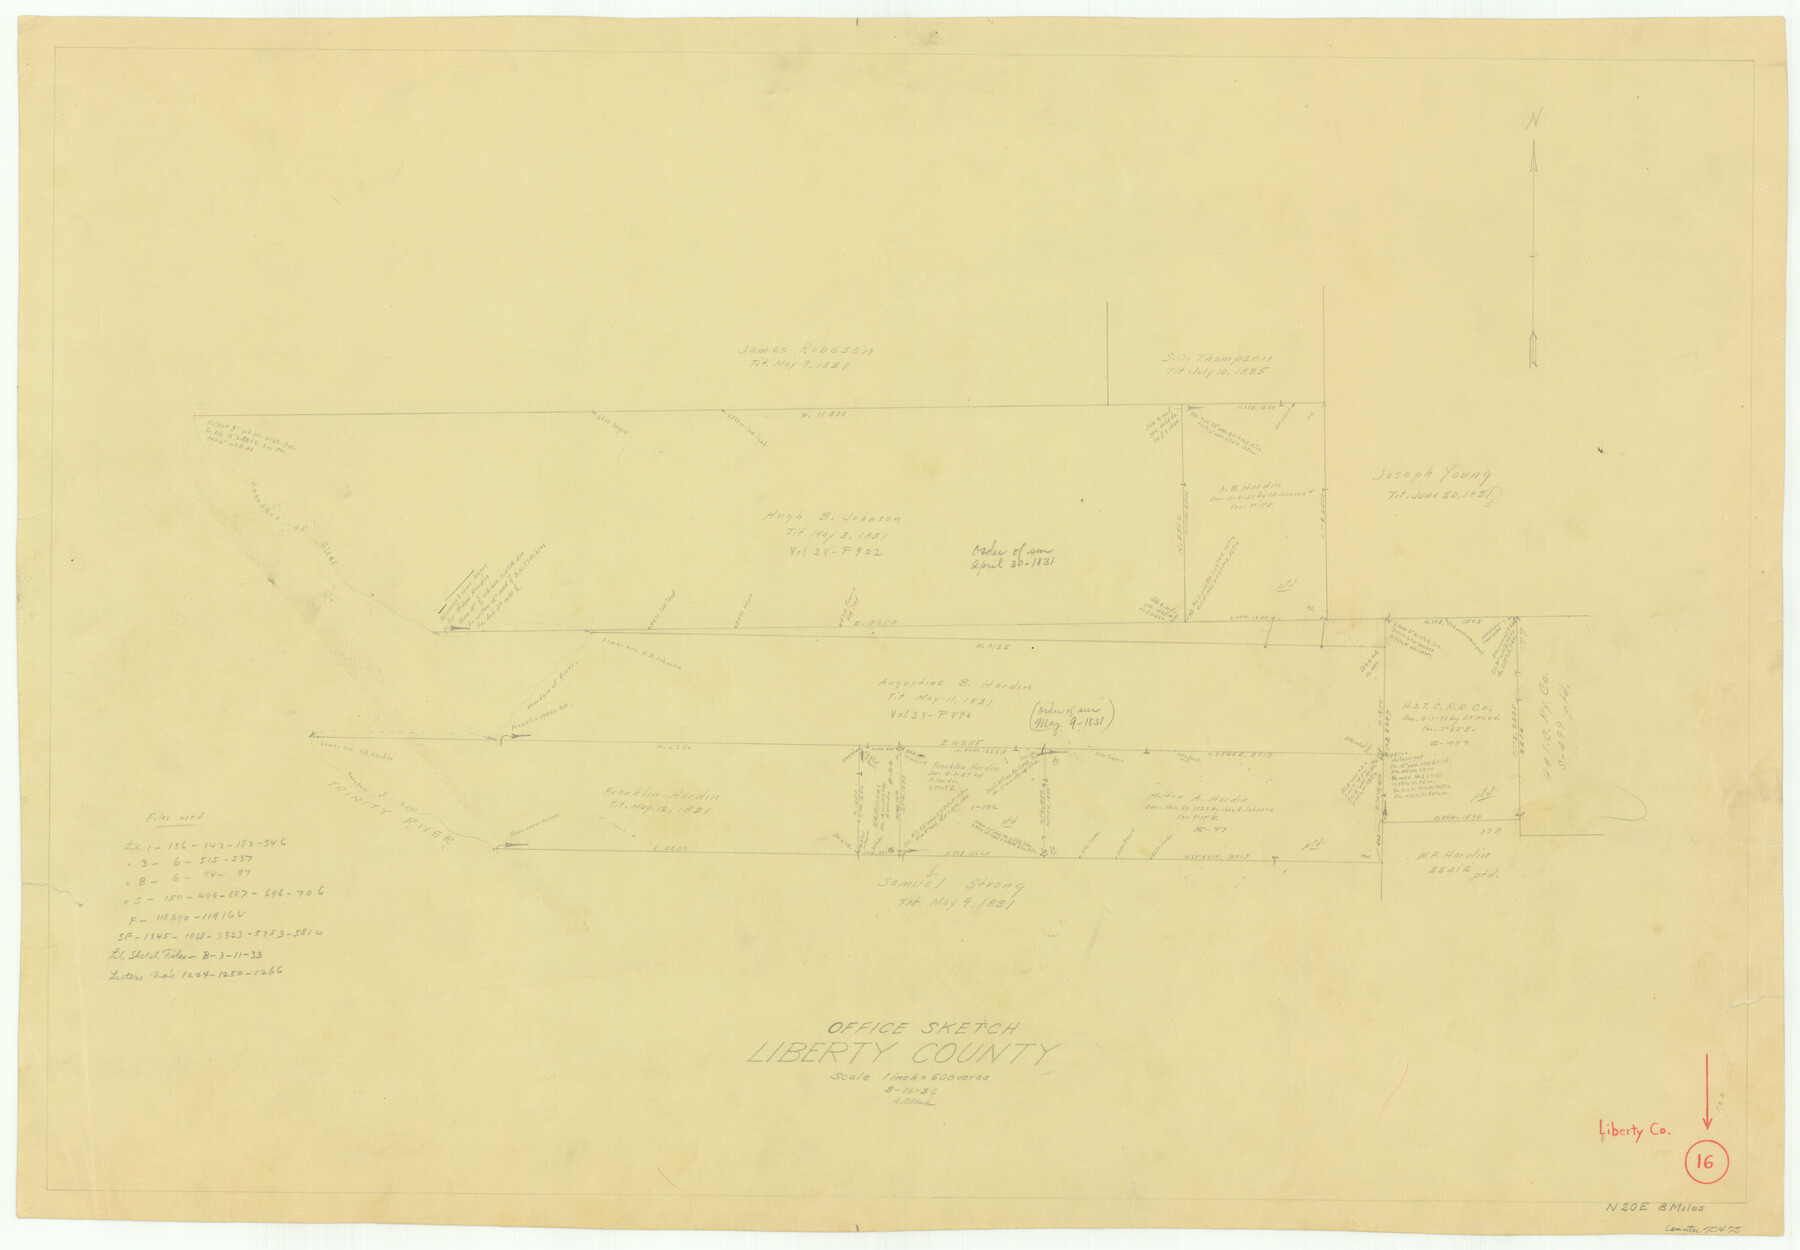 70475, Liberty County Working Sketch 16, General Map Collection